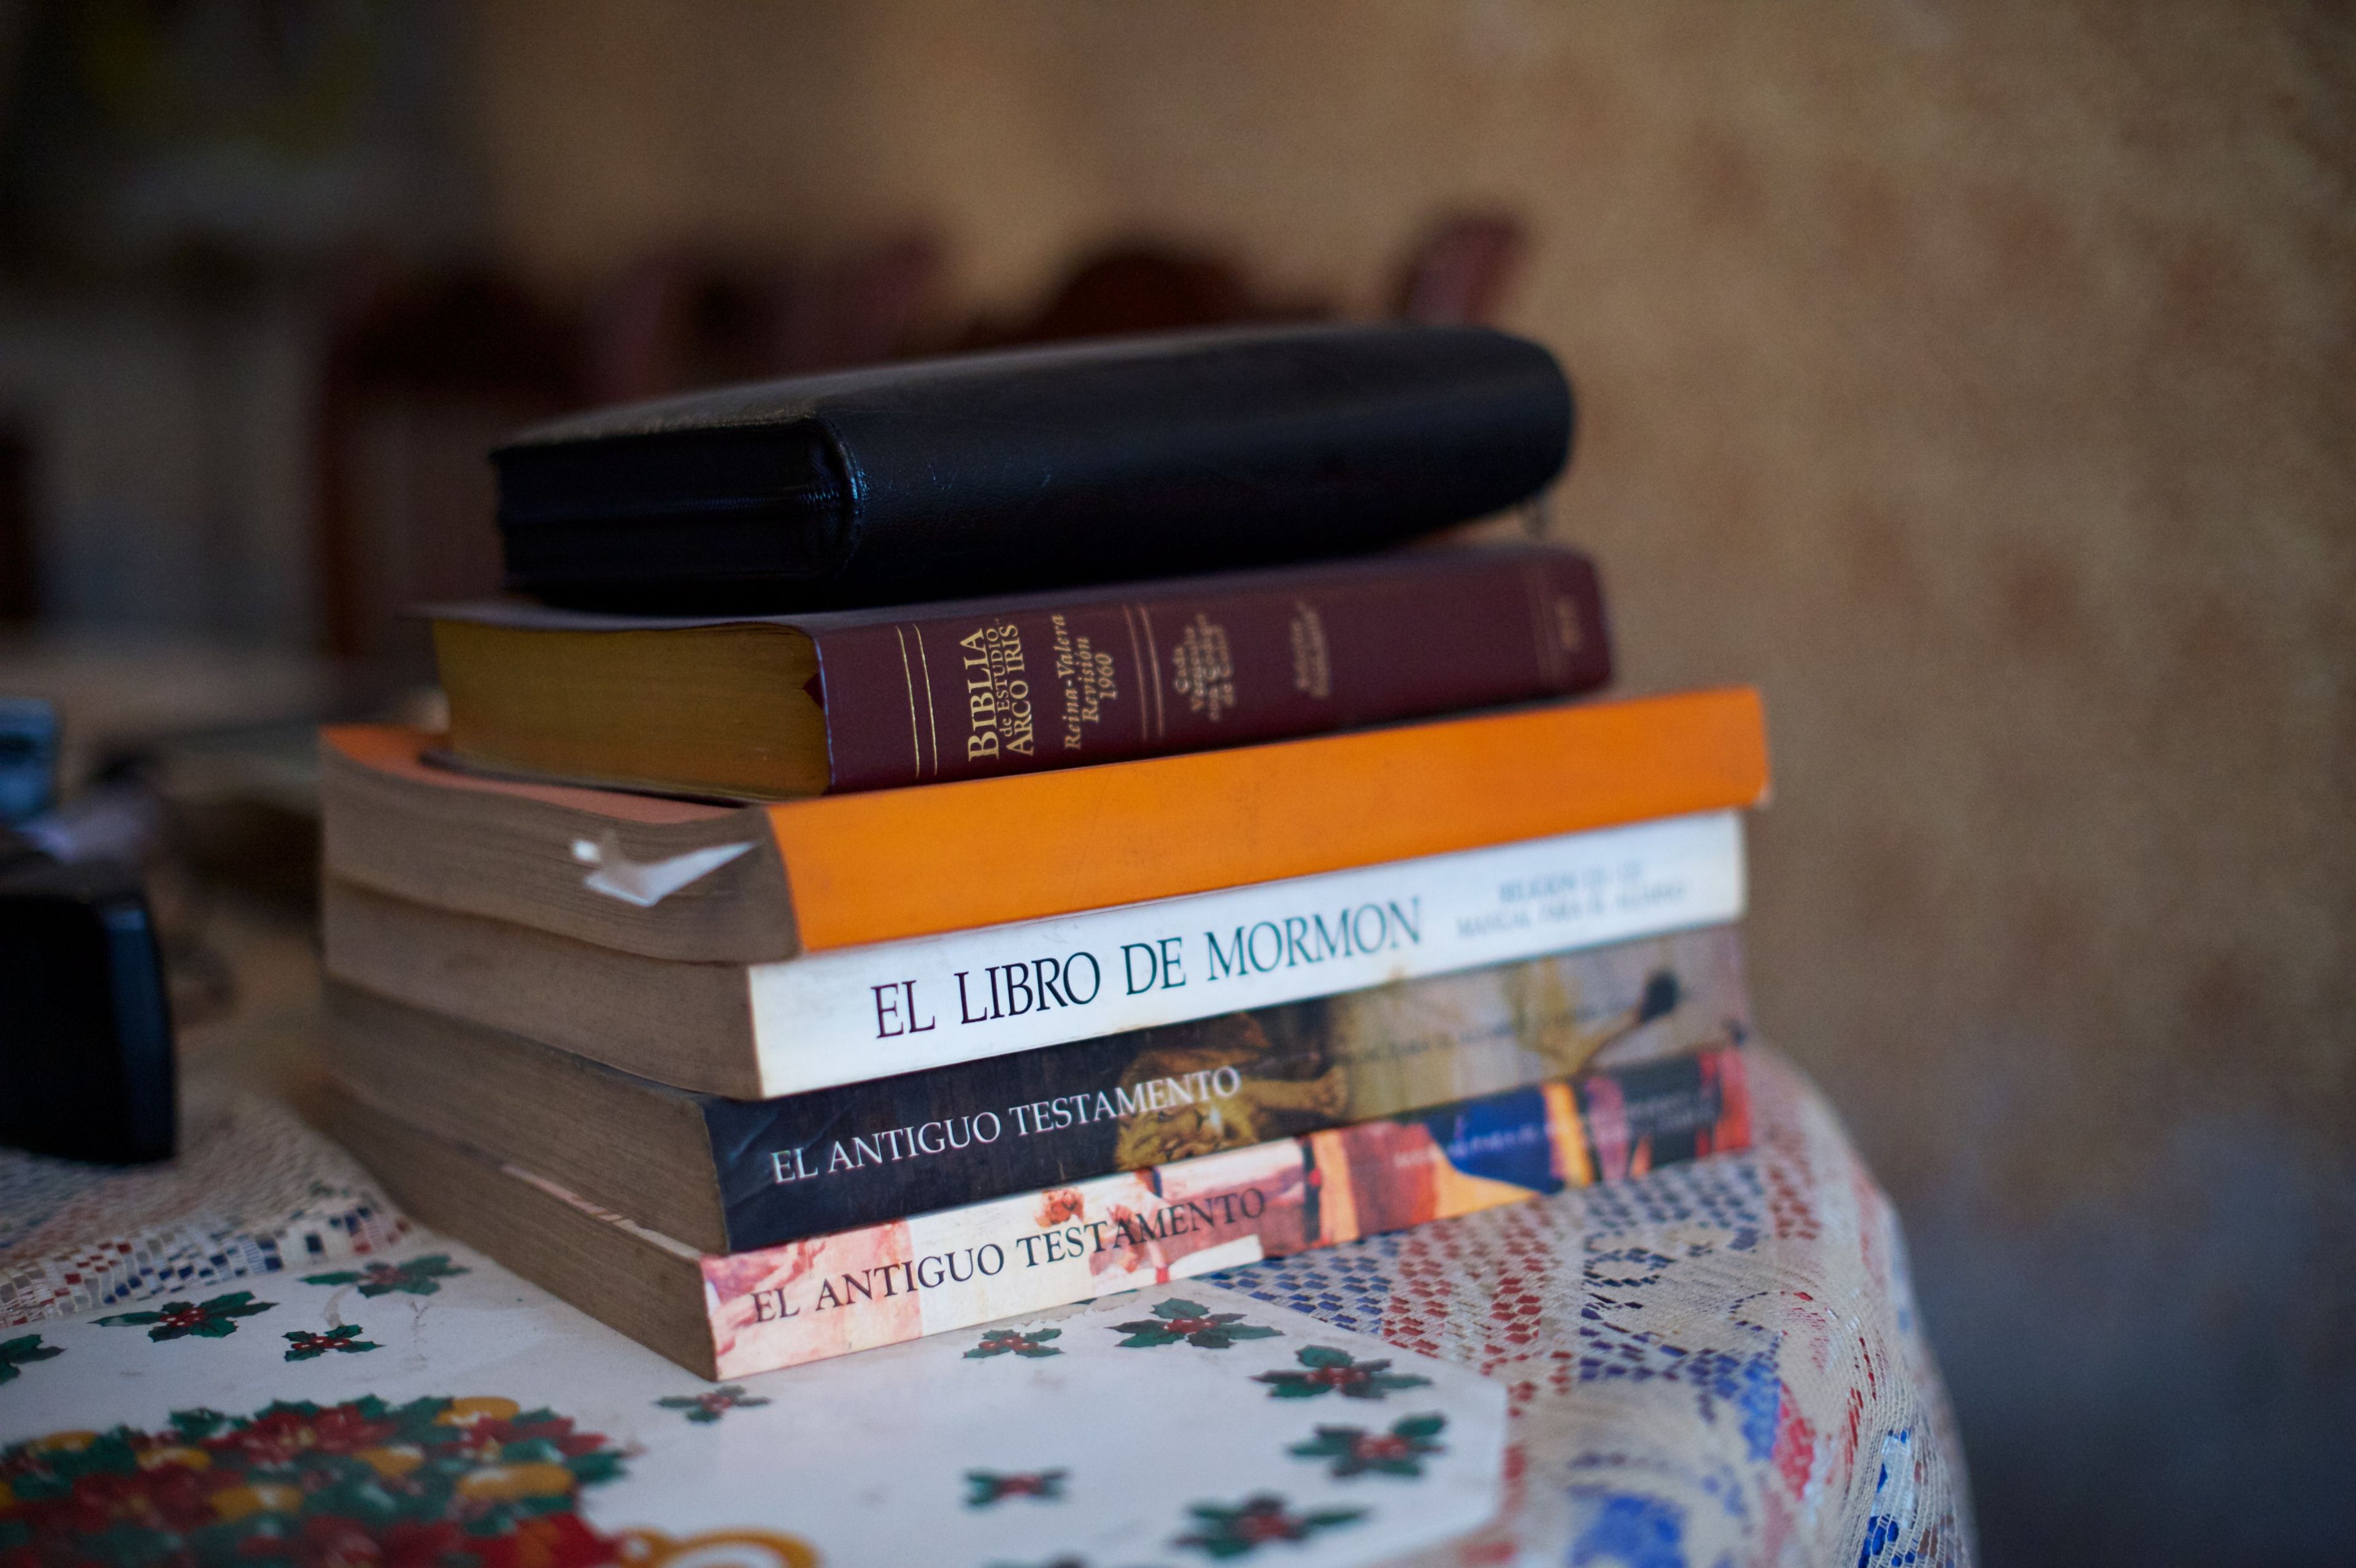 A stack of scriptures and other study materials in Spanish.